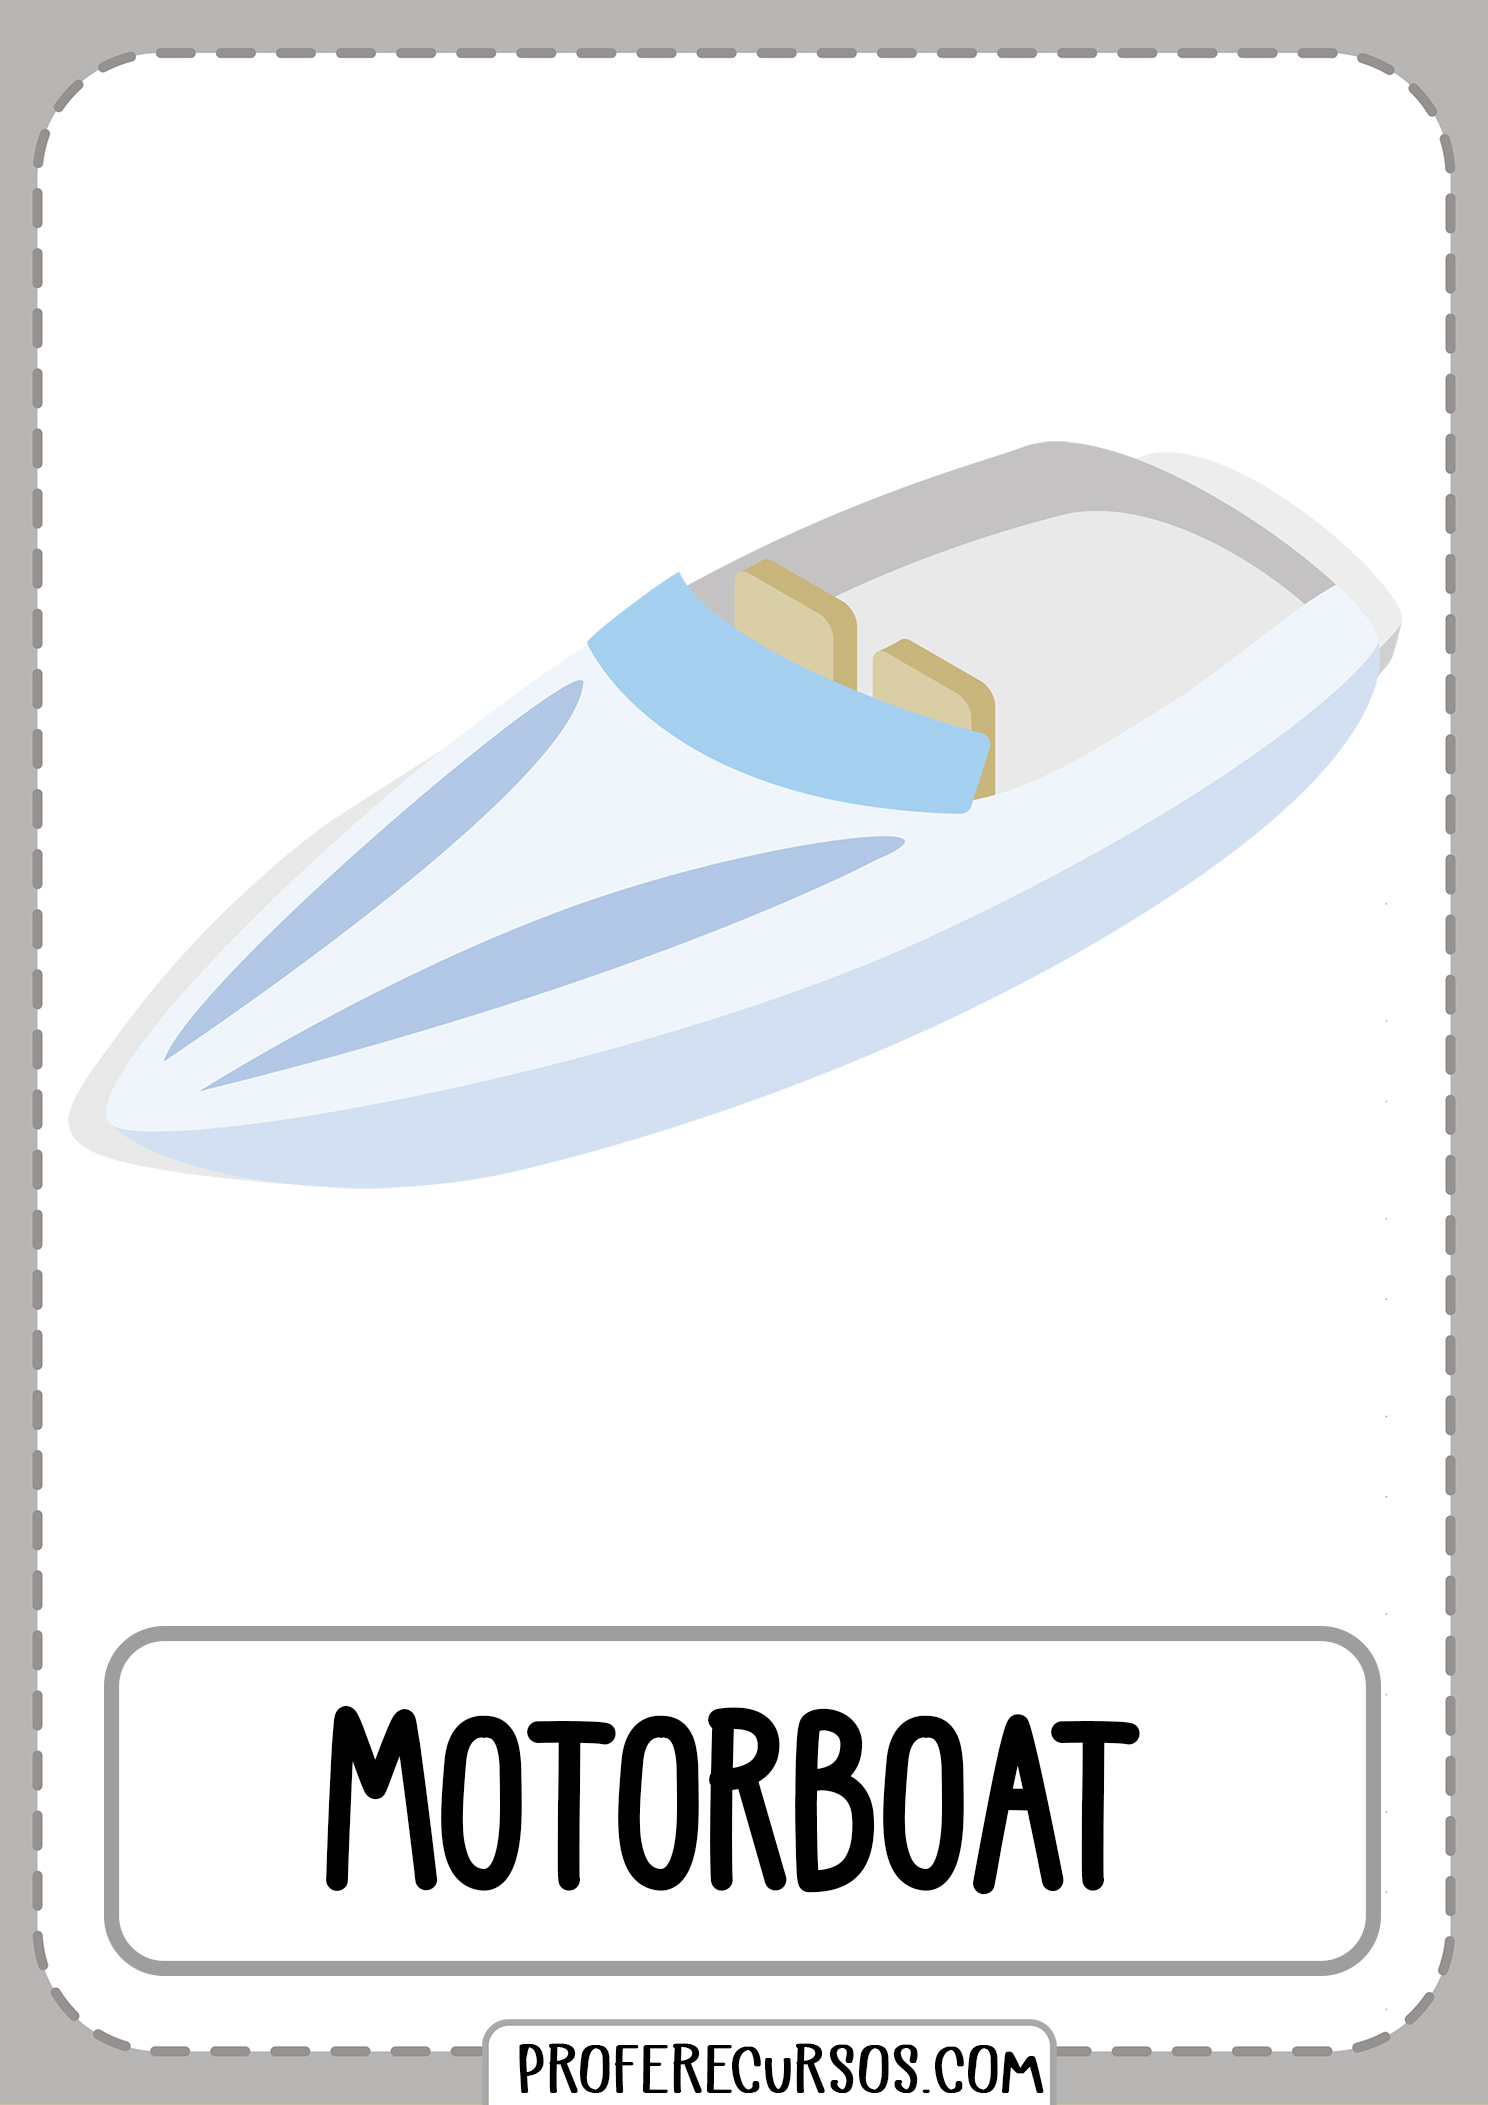 Means-of-transport-vocabulary-motorboat